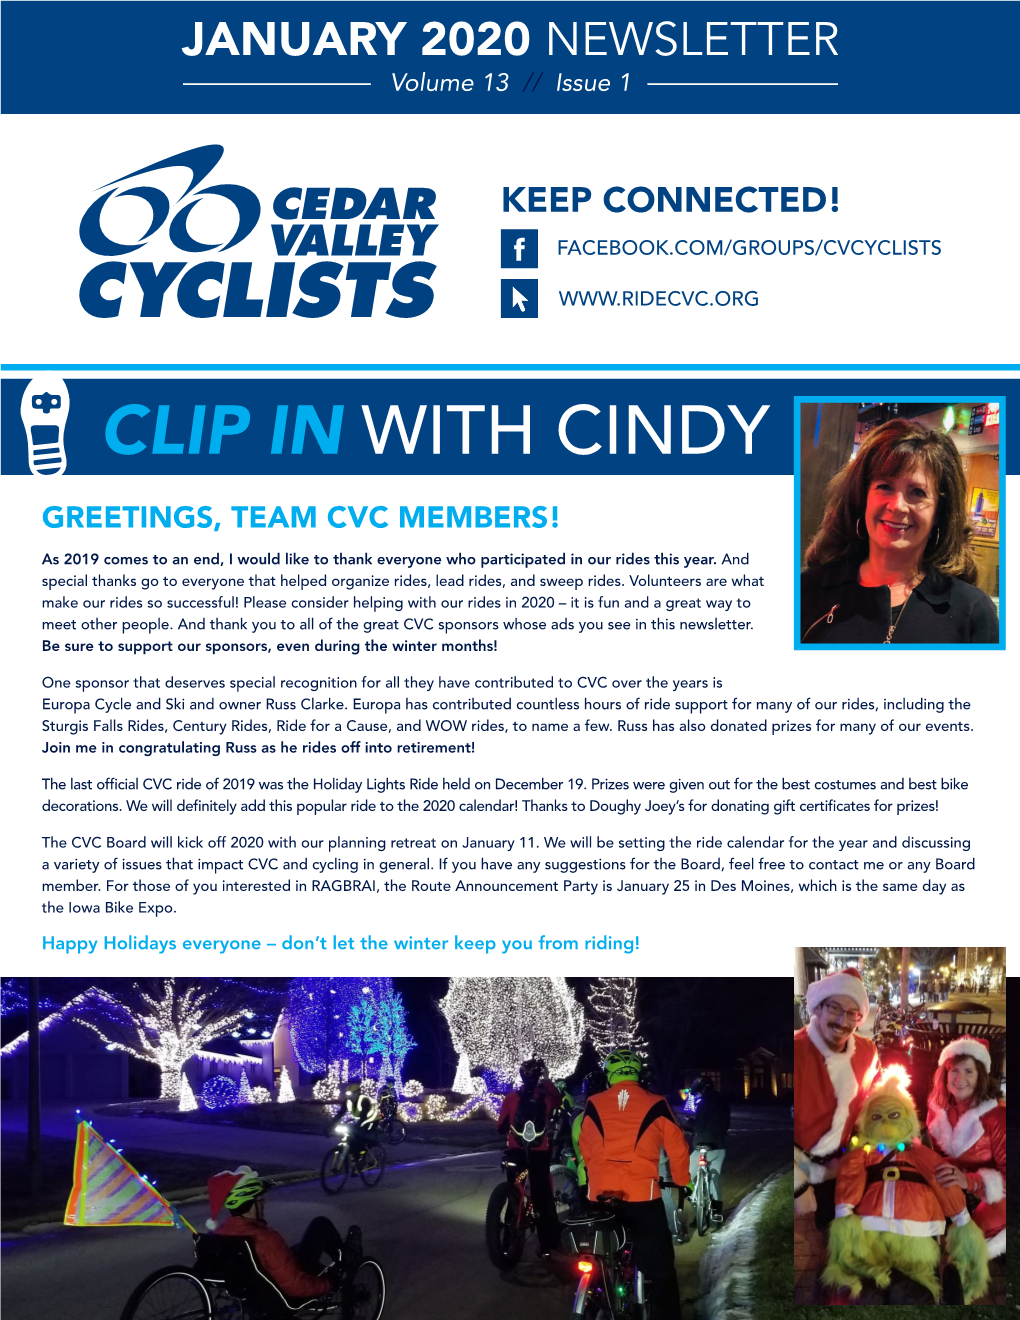 CLIP in with CINDY GREETINGS, TEAM CVC MEMBERS! As 2019 Comes to an End, I Would Like to Thank Everyone Who Participated in Our Rides This Year